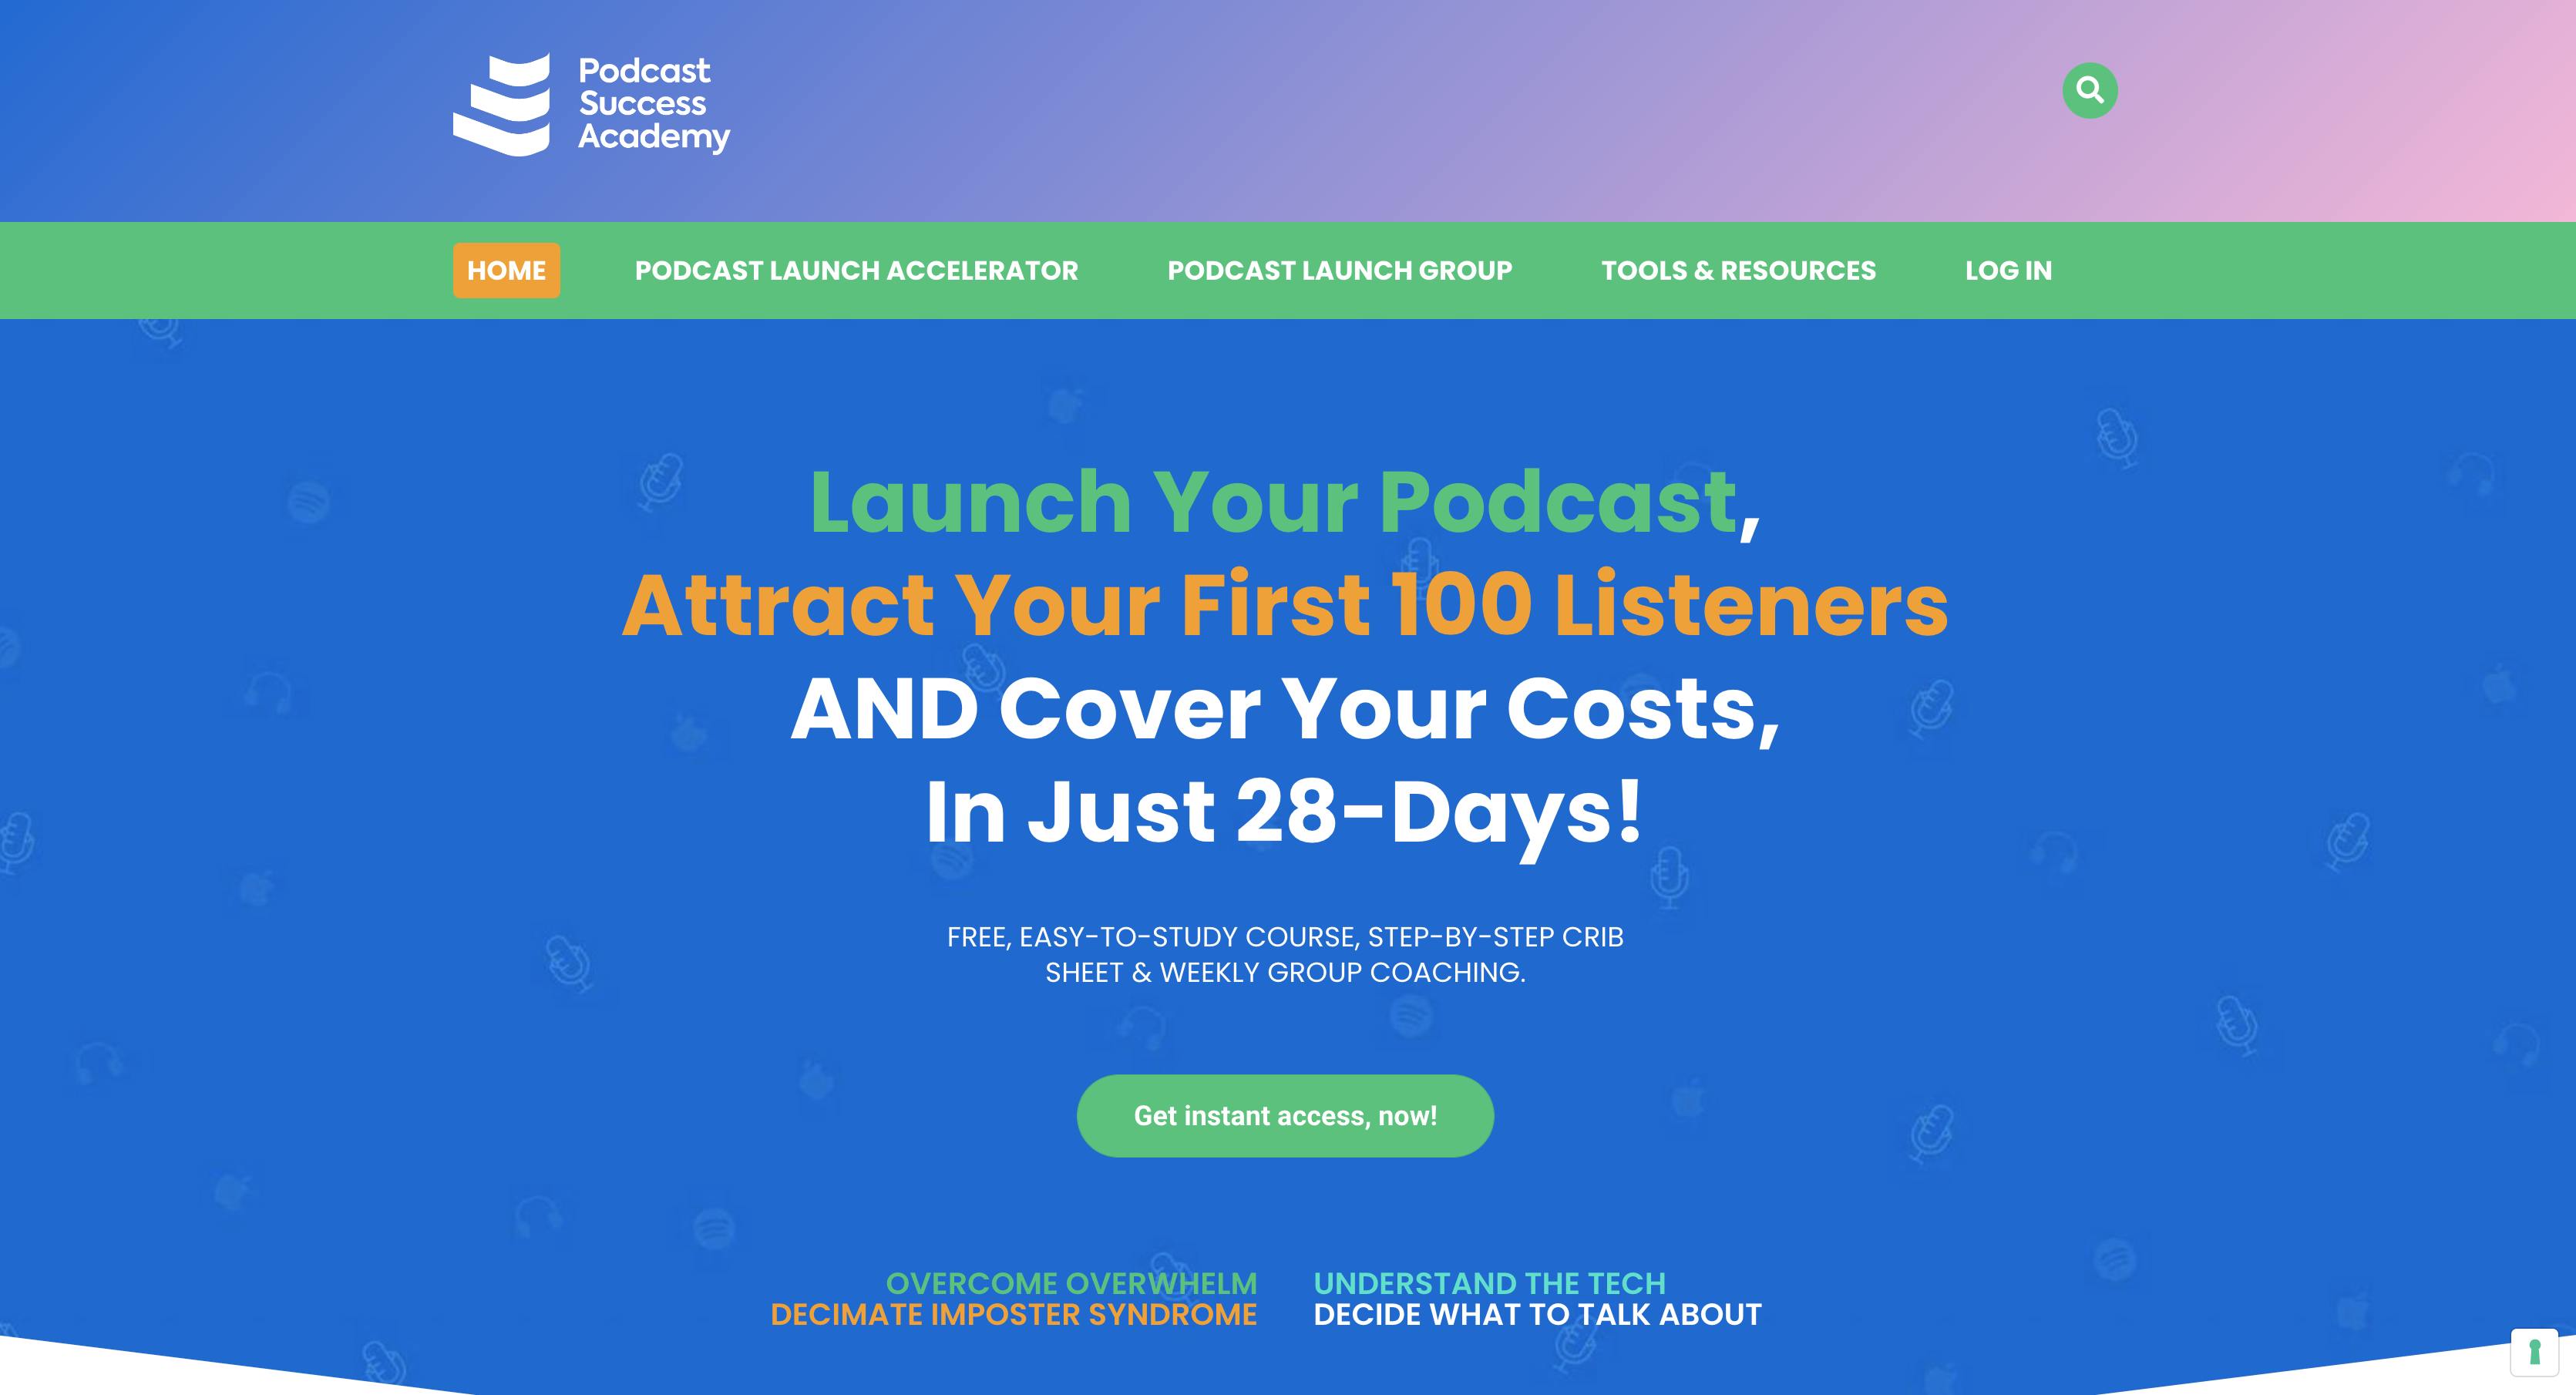 Podcast Launch Accelerator landing pagee with blue background, big white text, and a green button to enroll in the free podcast course